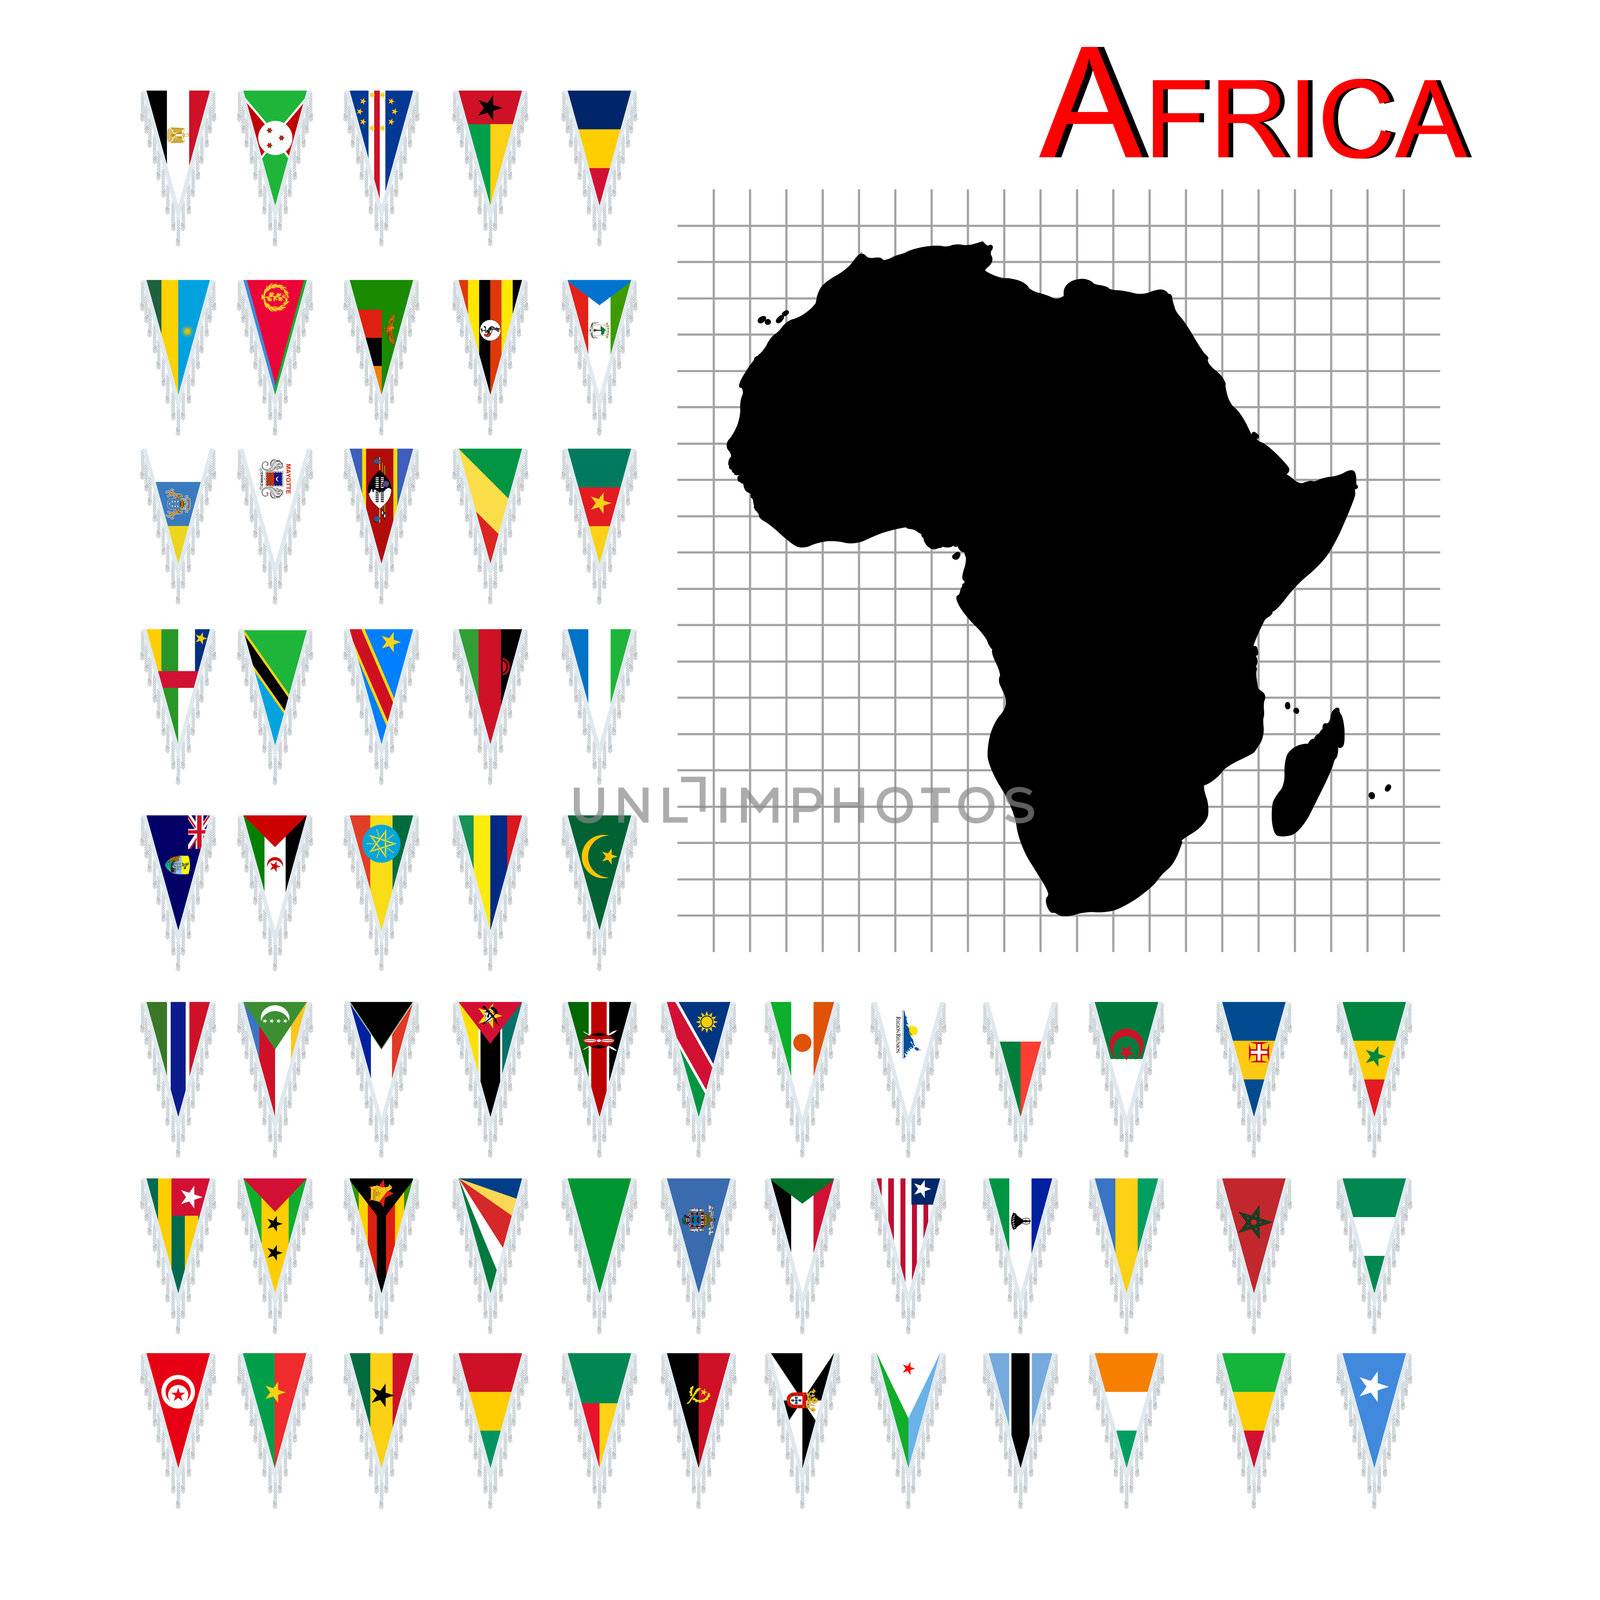 Flags of Africa by catacos